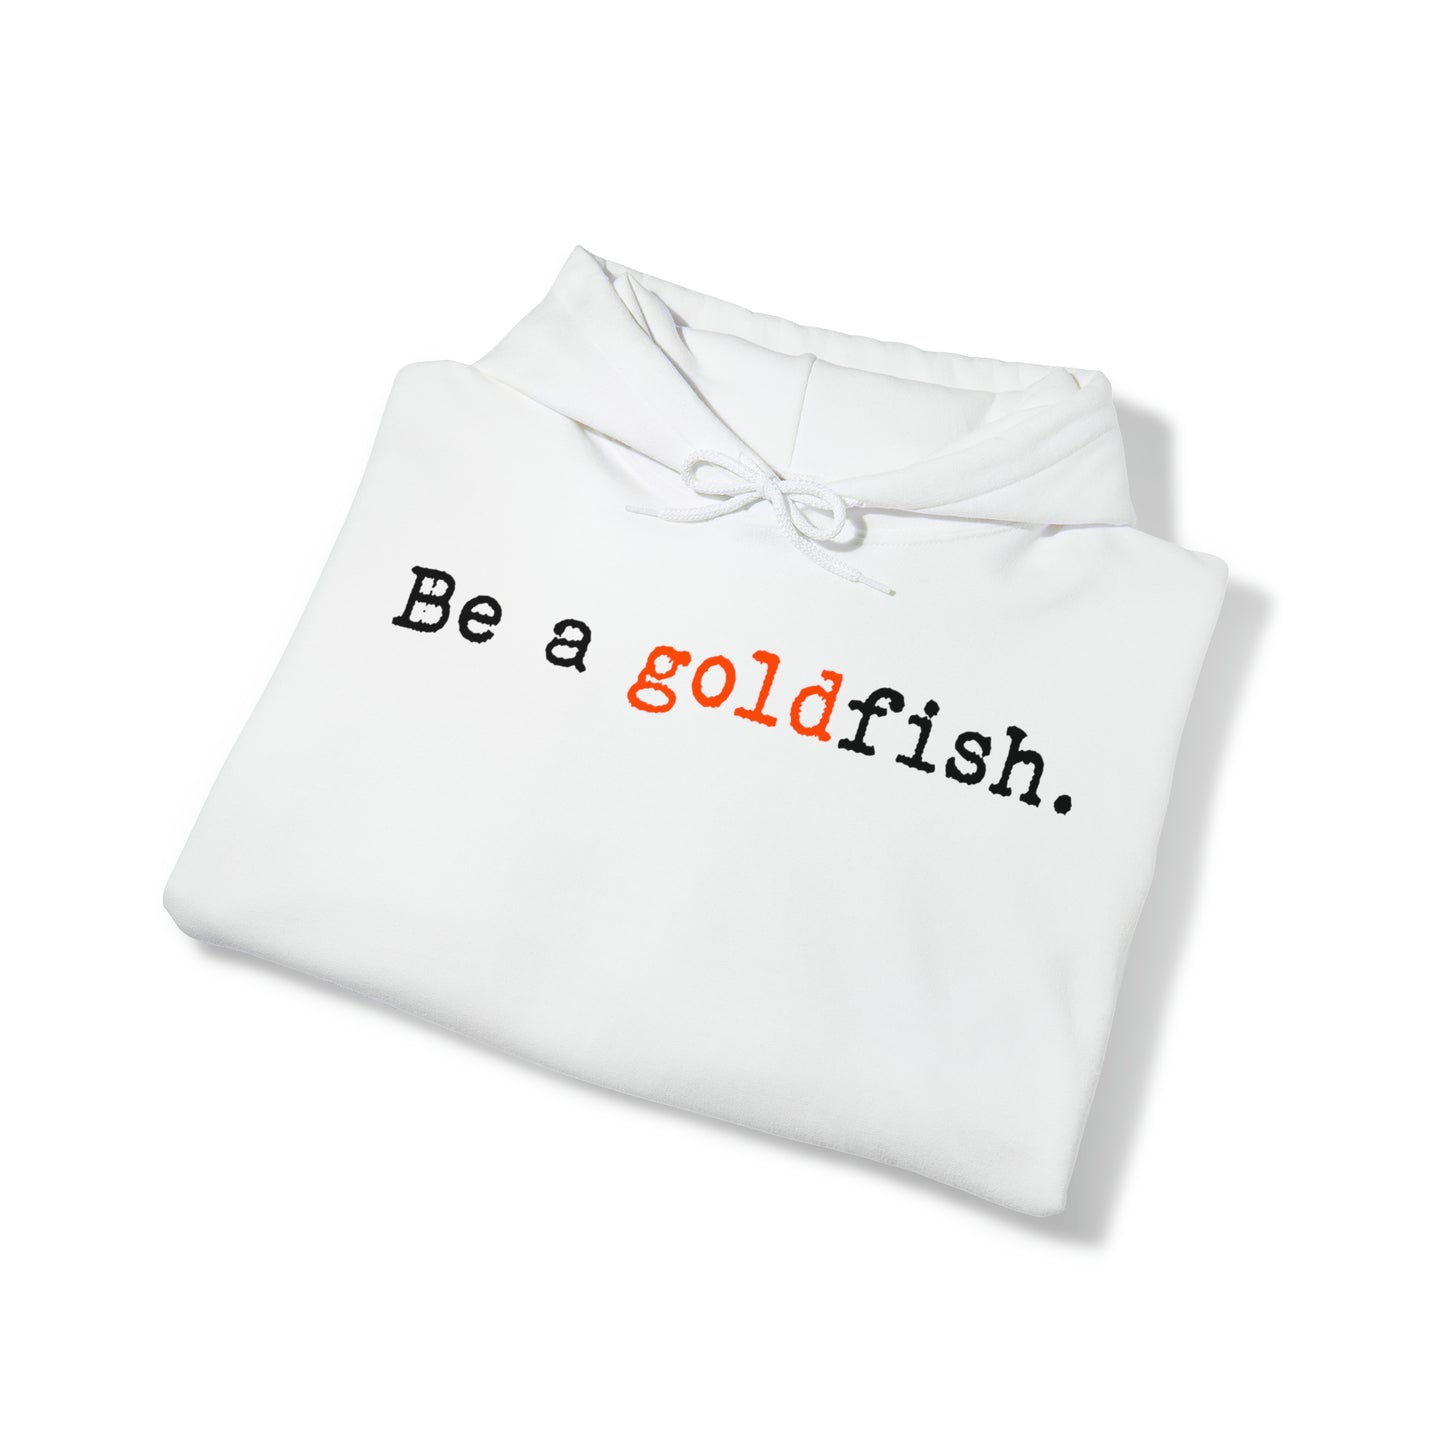 Be a Goldfish White Hoodie